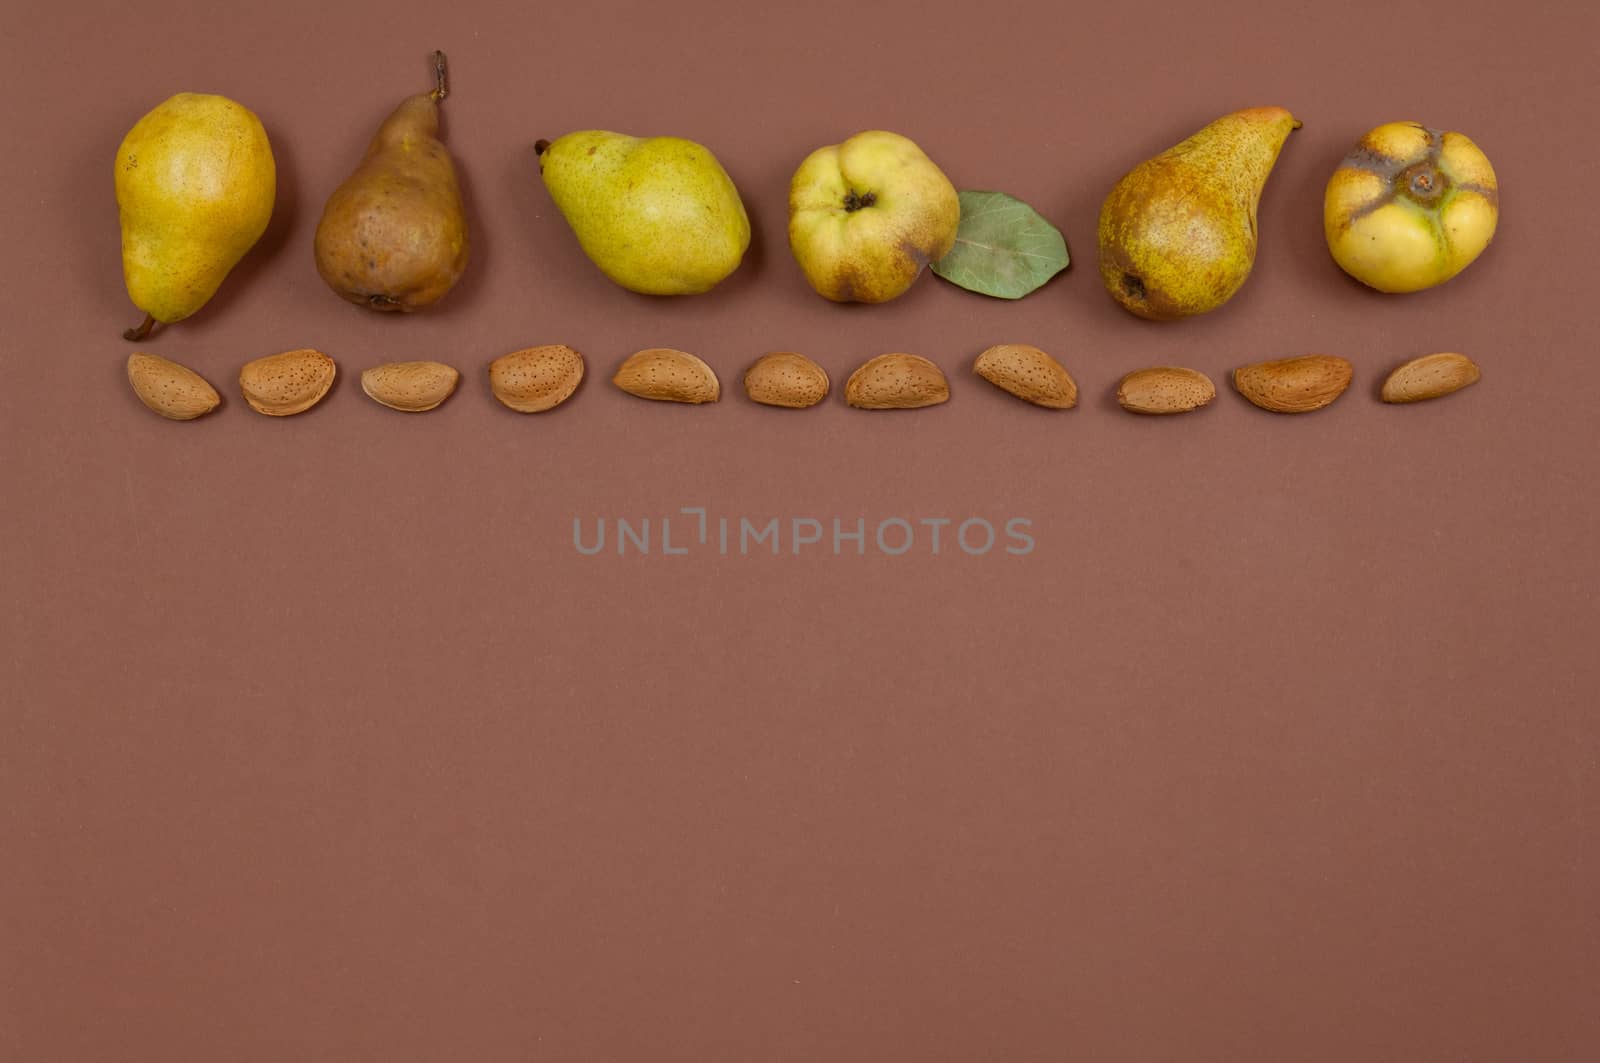 Pears and almonds row on yellow background with copy space by horizonphoto